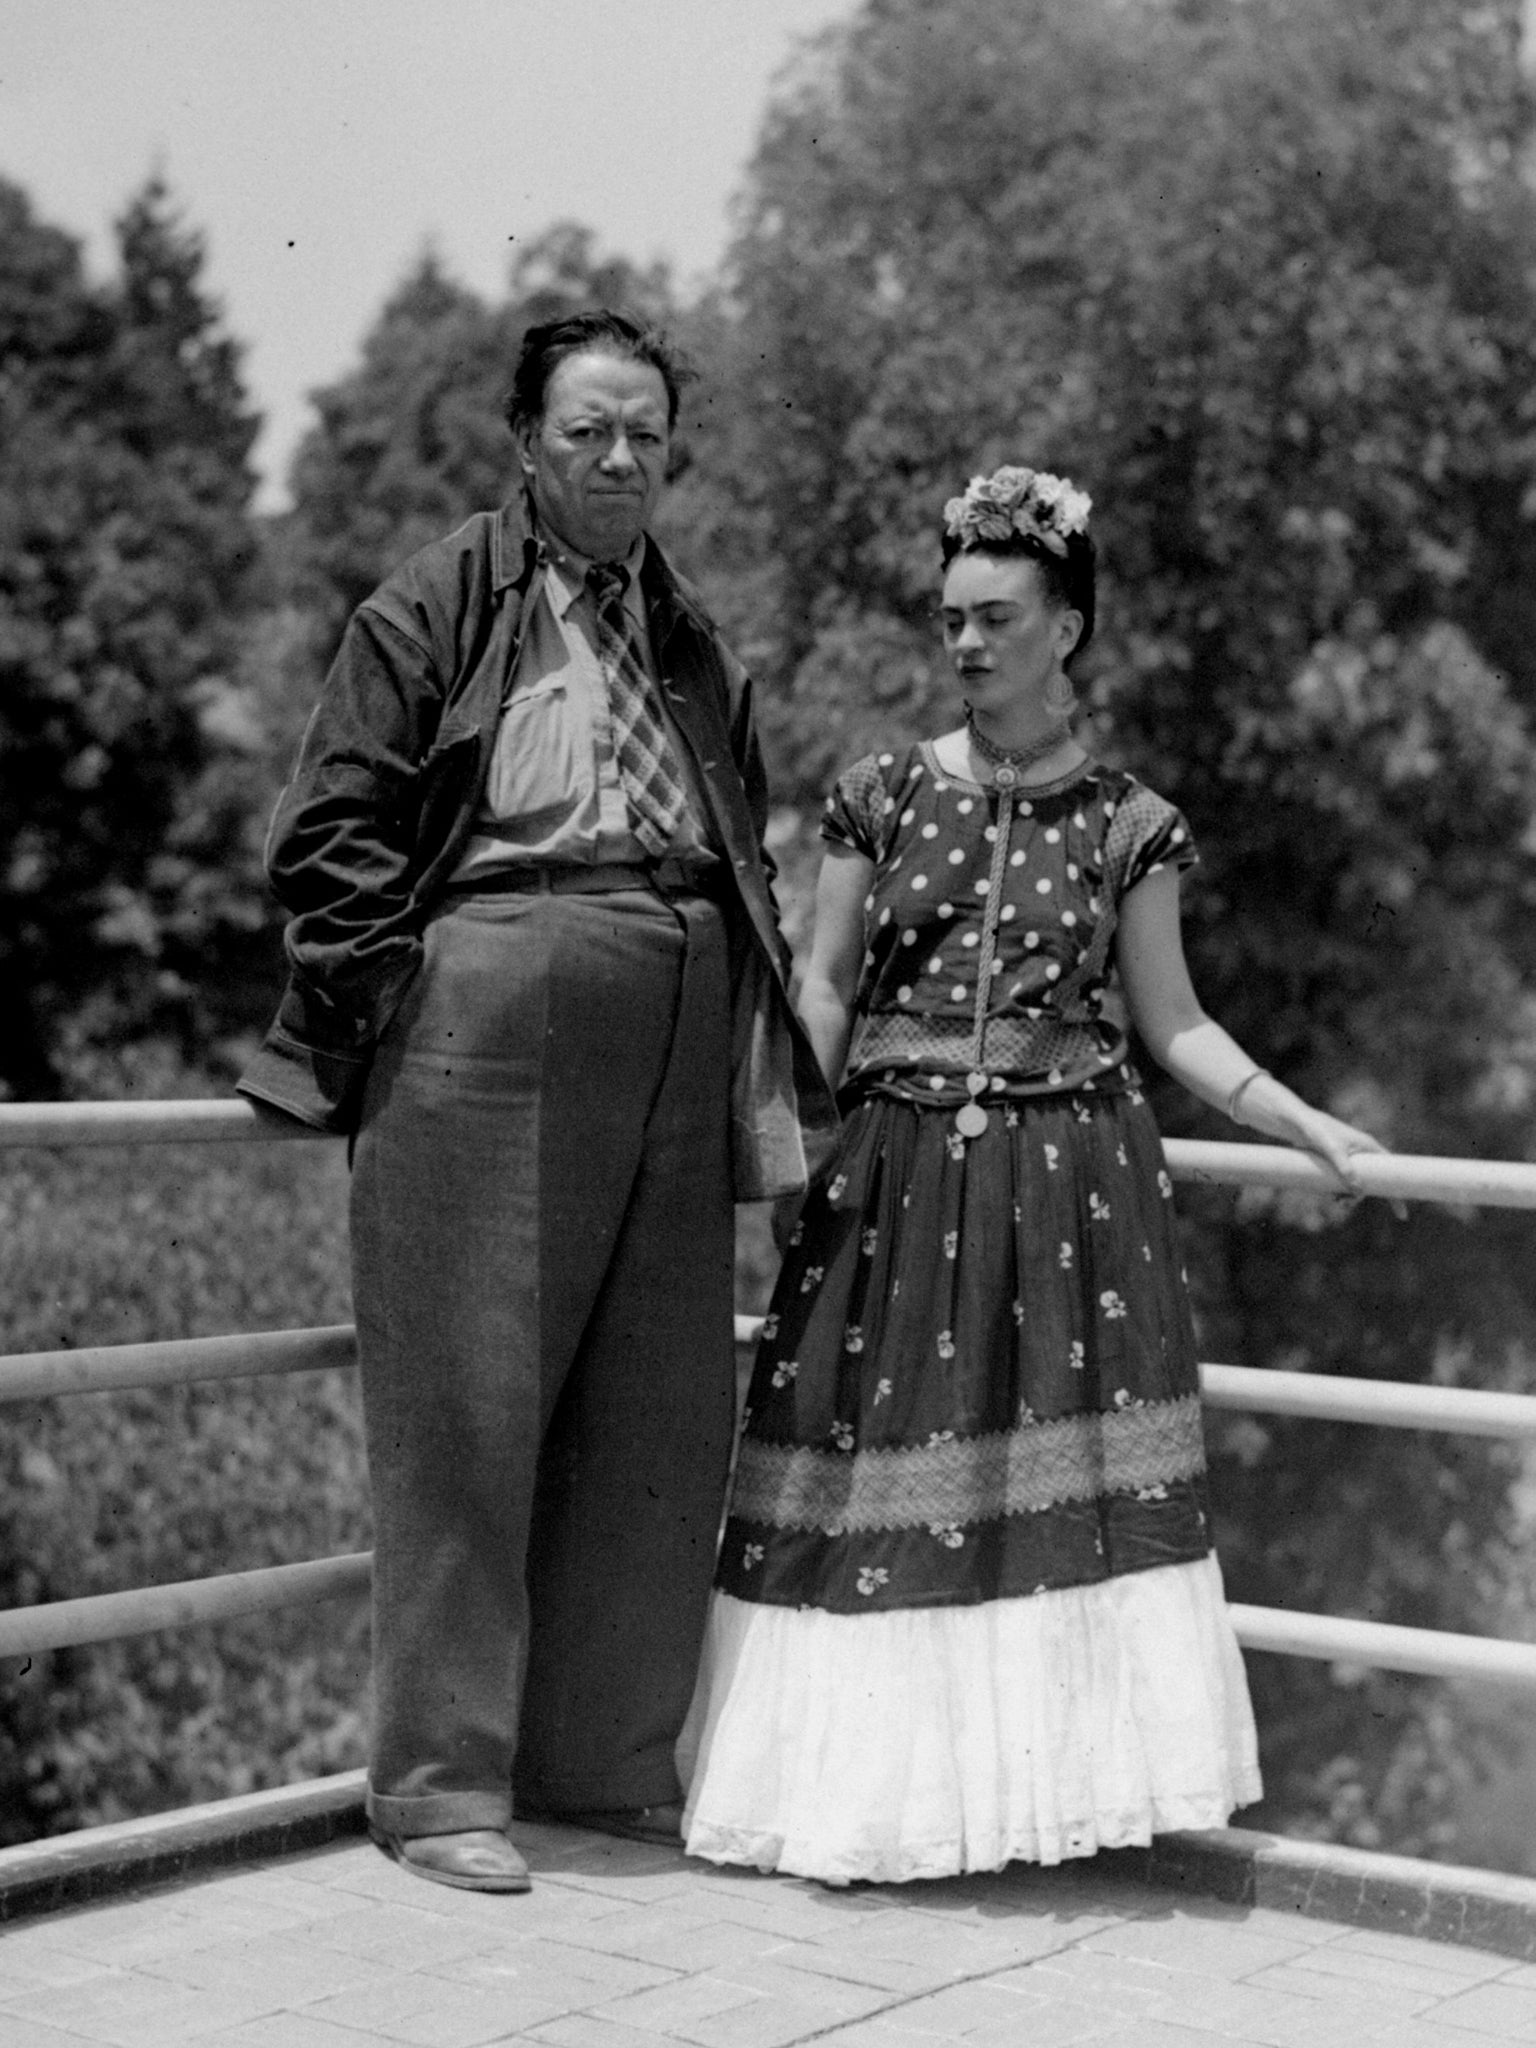 Diego Rivera and Frida Kahlo at their home in Mexico City